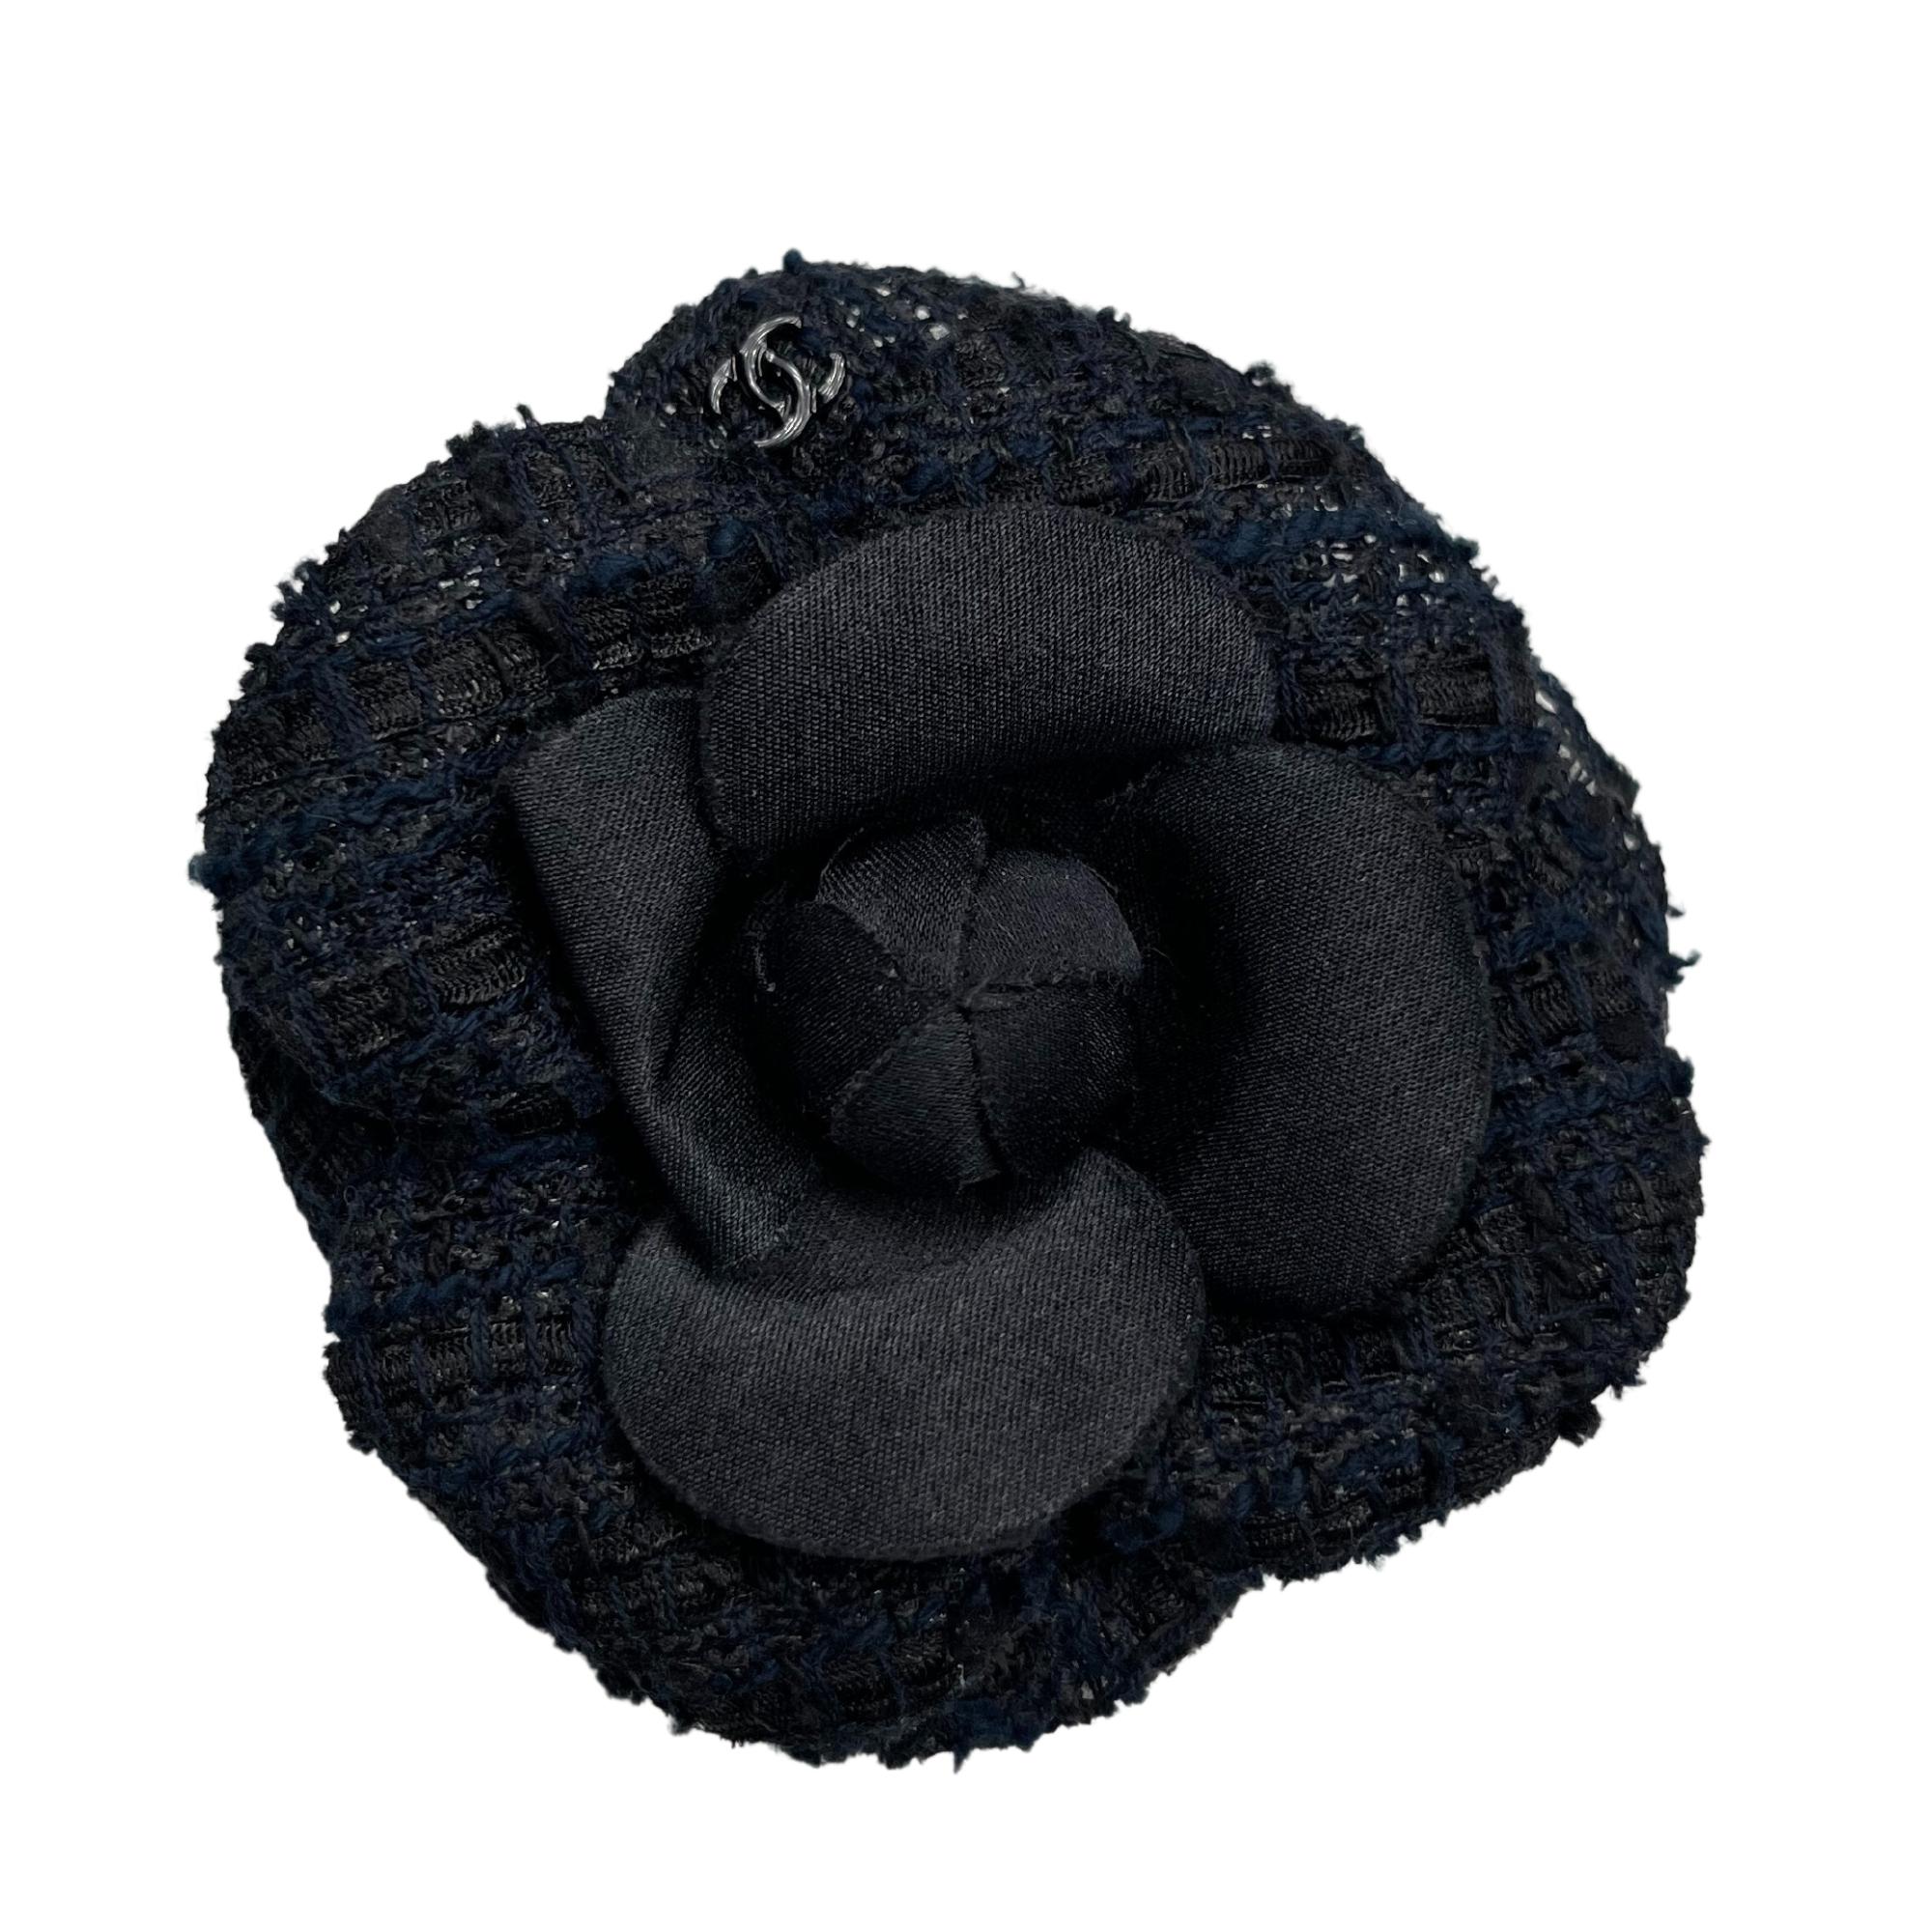 Camélia Chanel brooch in black tweed with the Chanel logo visible on a petal.

Color: Black
Material: Tweed
Clasp Style:
Condition: Excellent.
Comes With: Chanel vendor bag
Measures: 3” x 3”